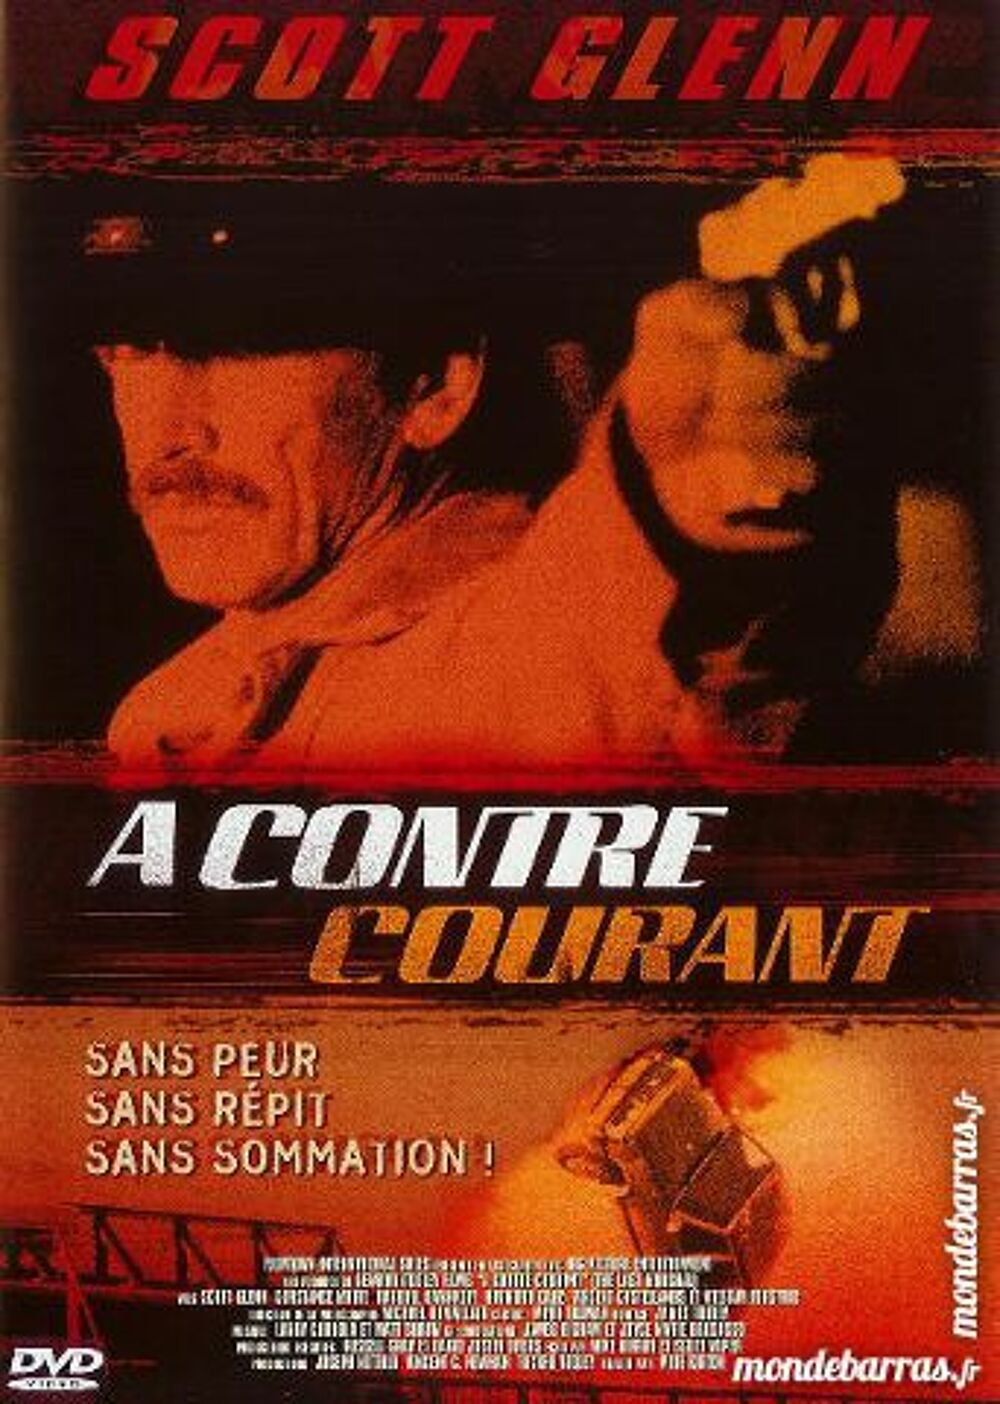 Dvd: A contre courant (512) DVD et blu-ray